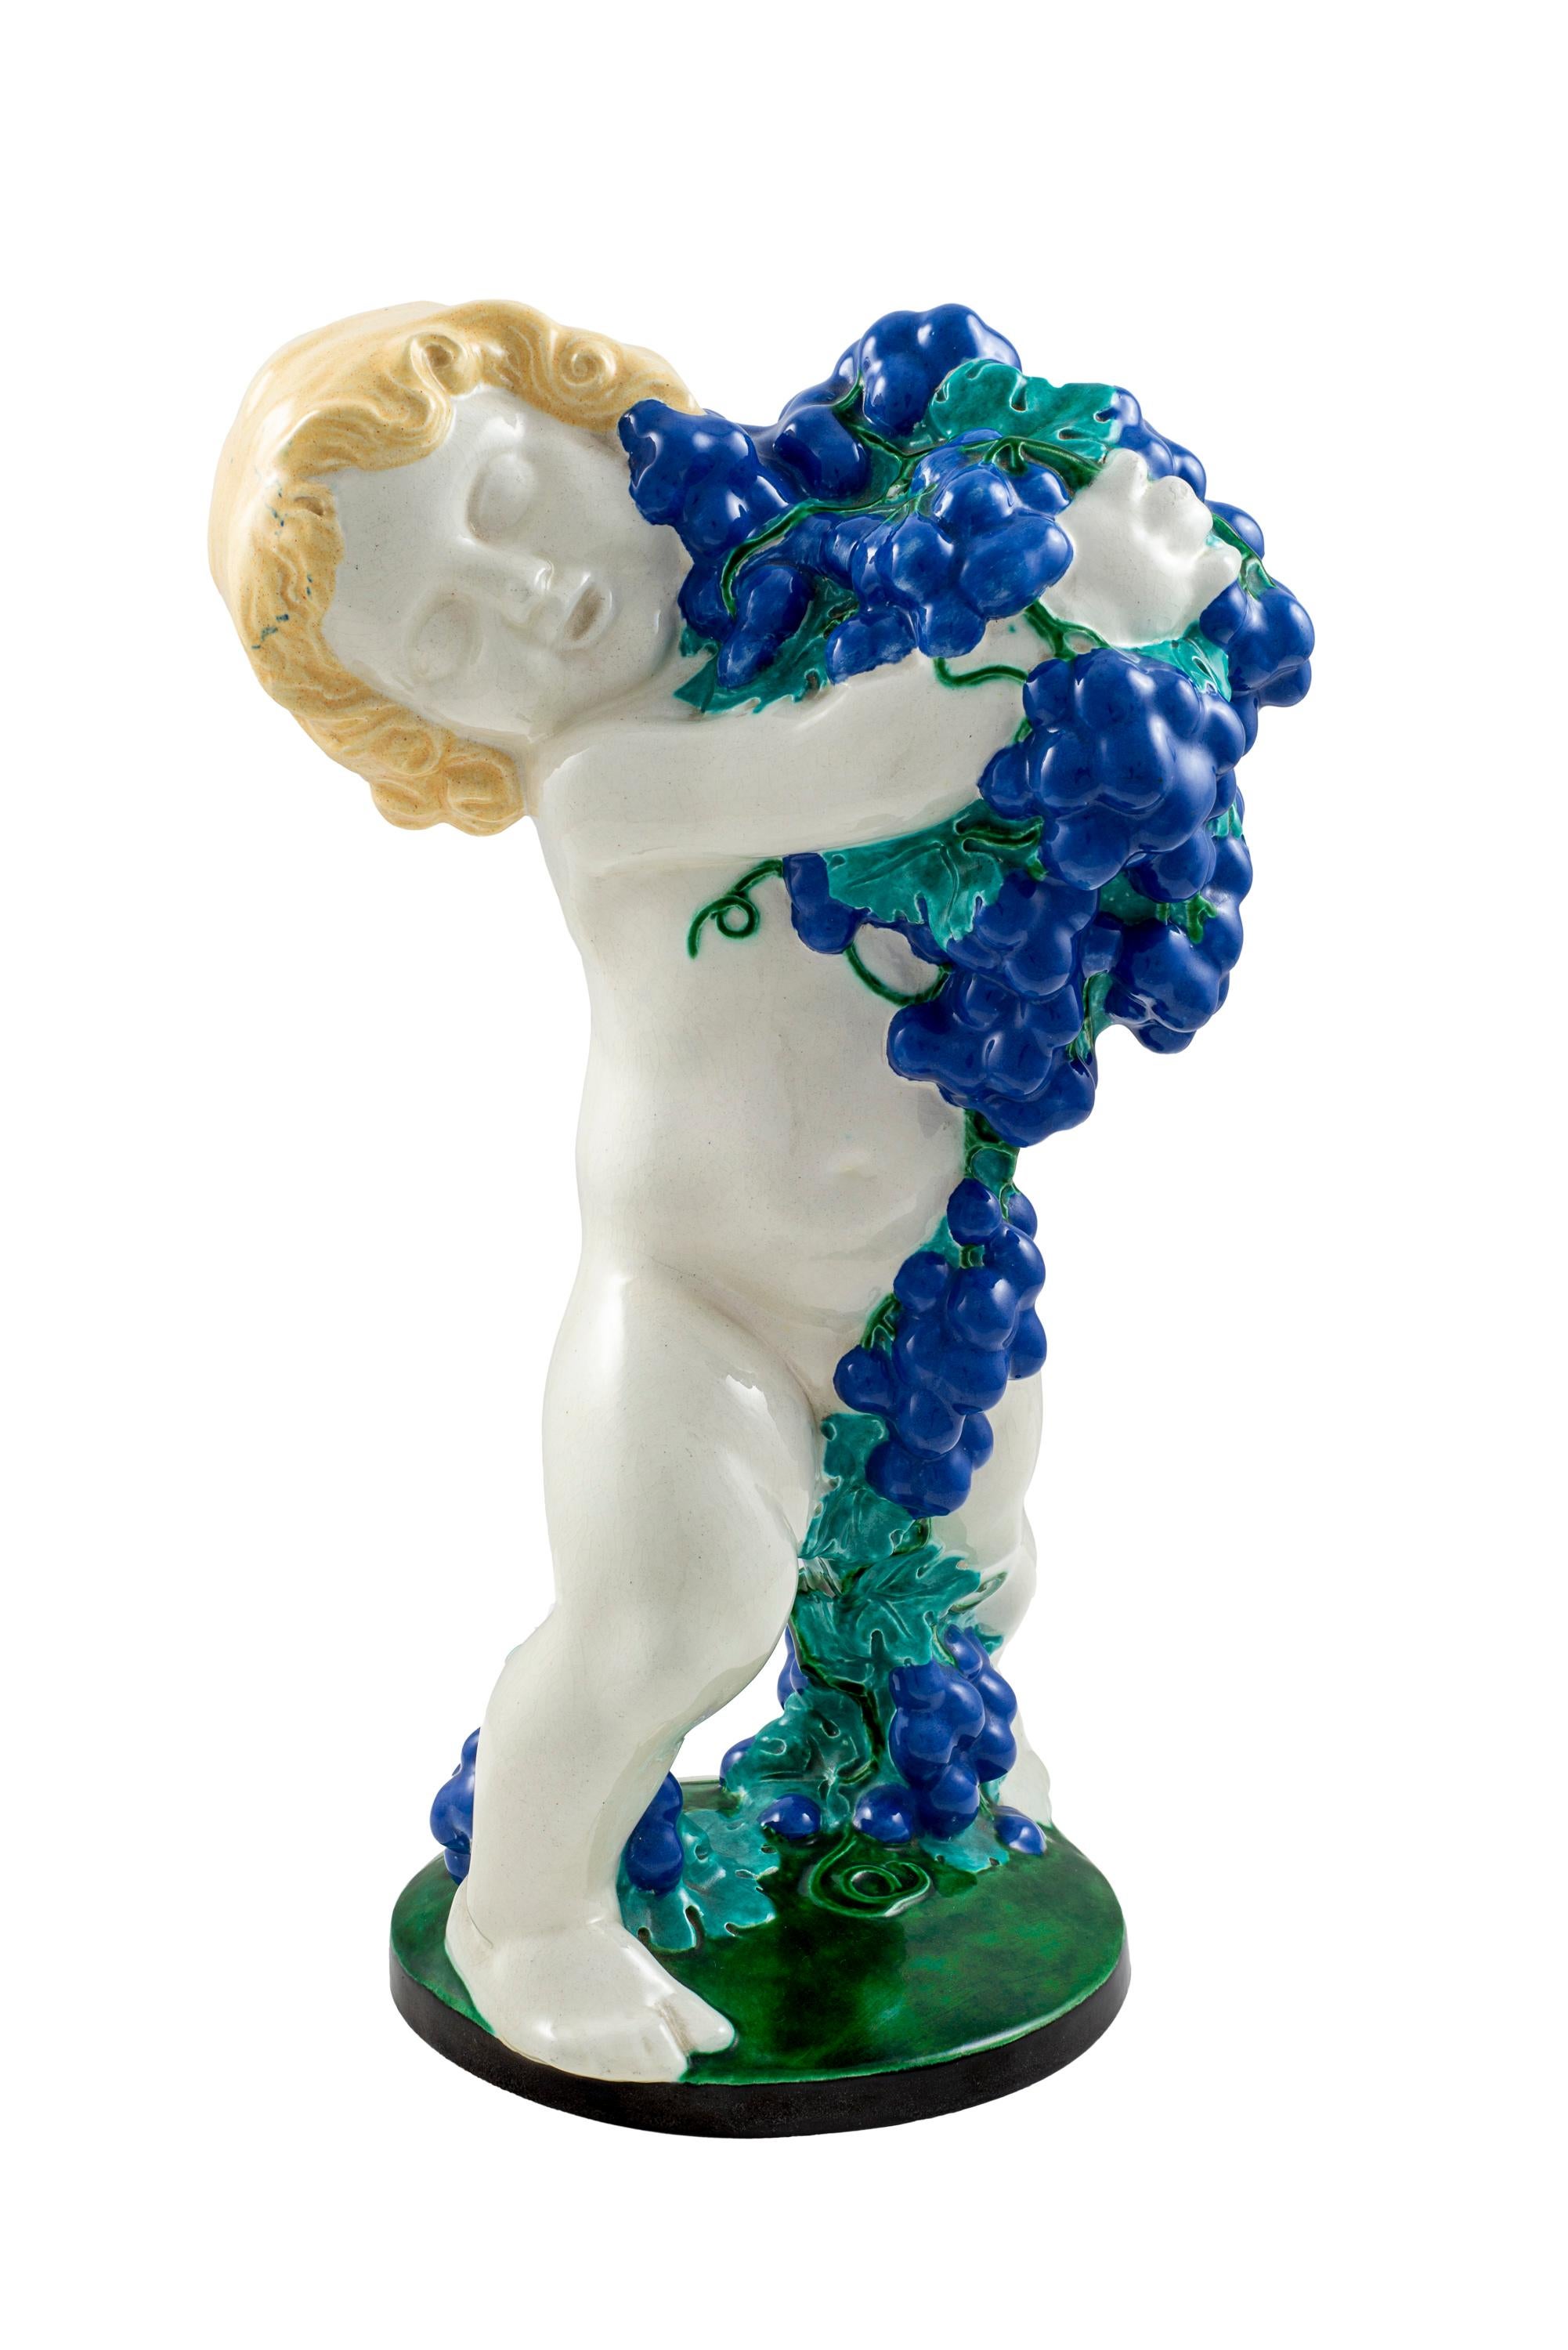 Colorfully glazed ceramics putto with grapes Michael Powolny Austrian Jugendstil circa 1907 Allegory of Autumn

Michael Powolny (Judenburg 1871-1954 Vienna) is one of the best-known ceramic artists of the Viennese Art Nouveau and popular among